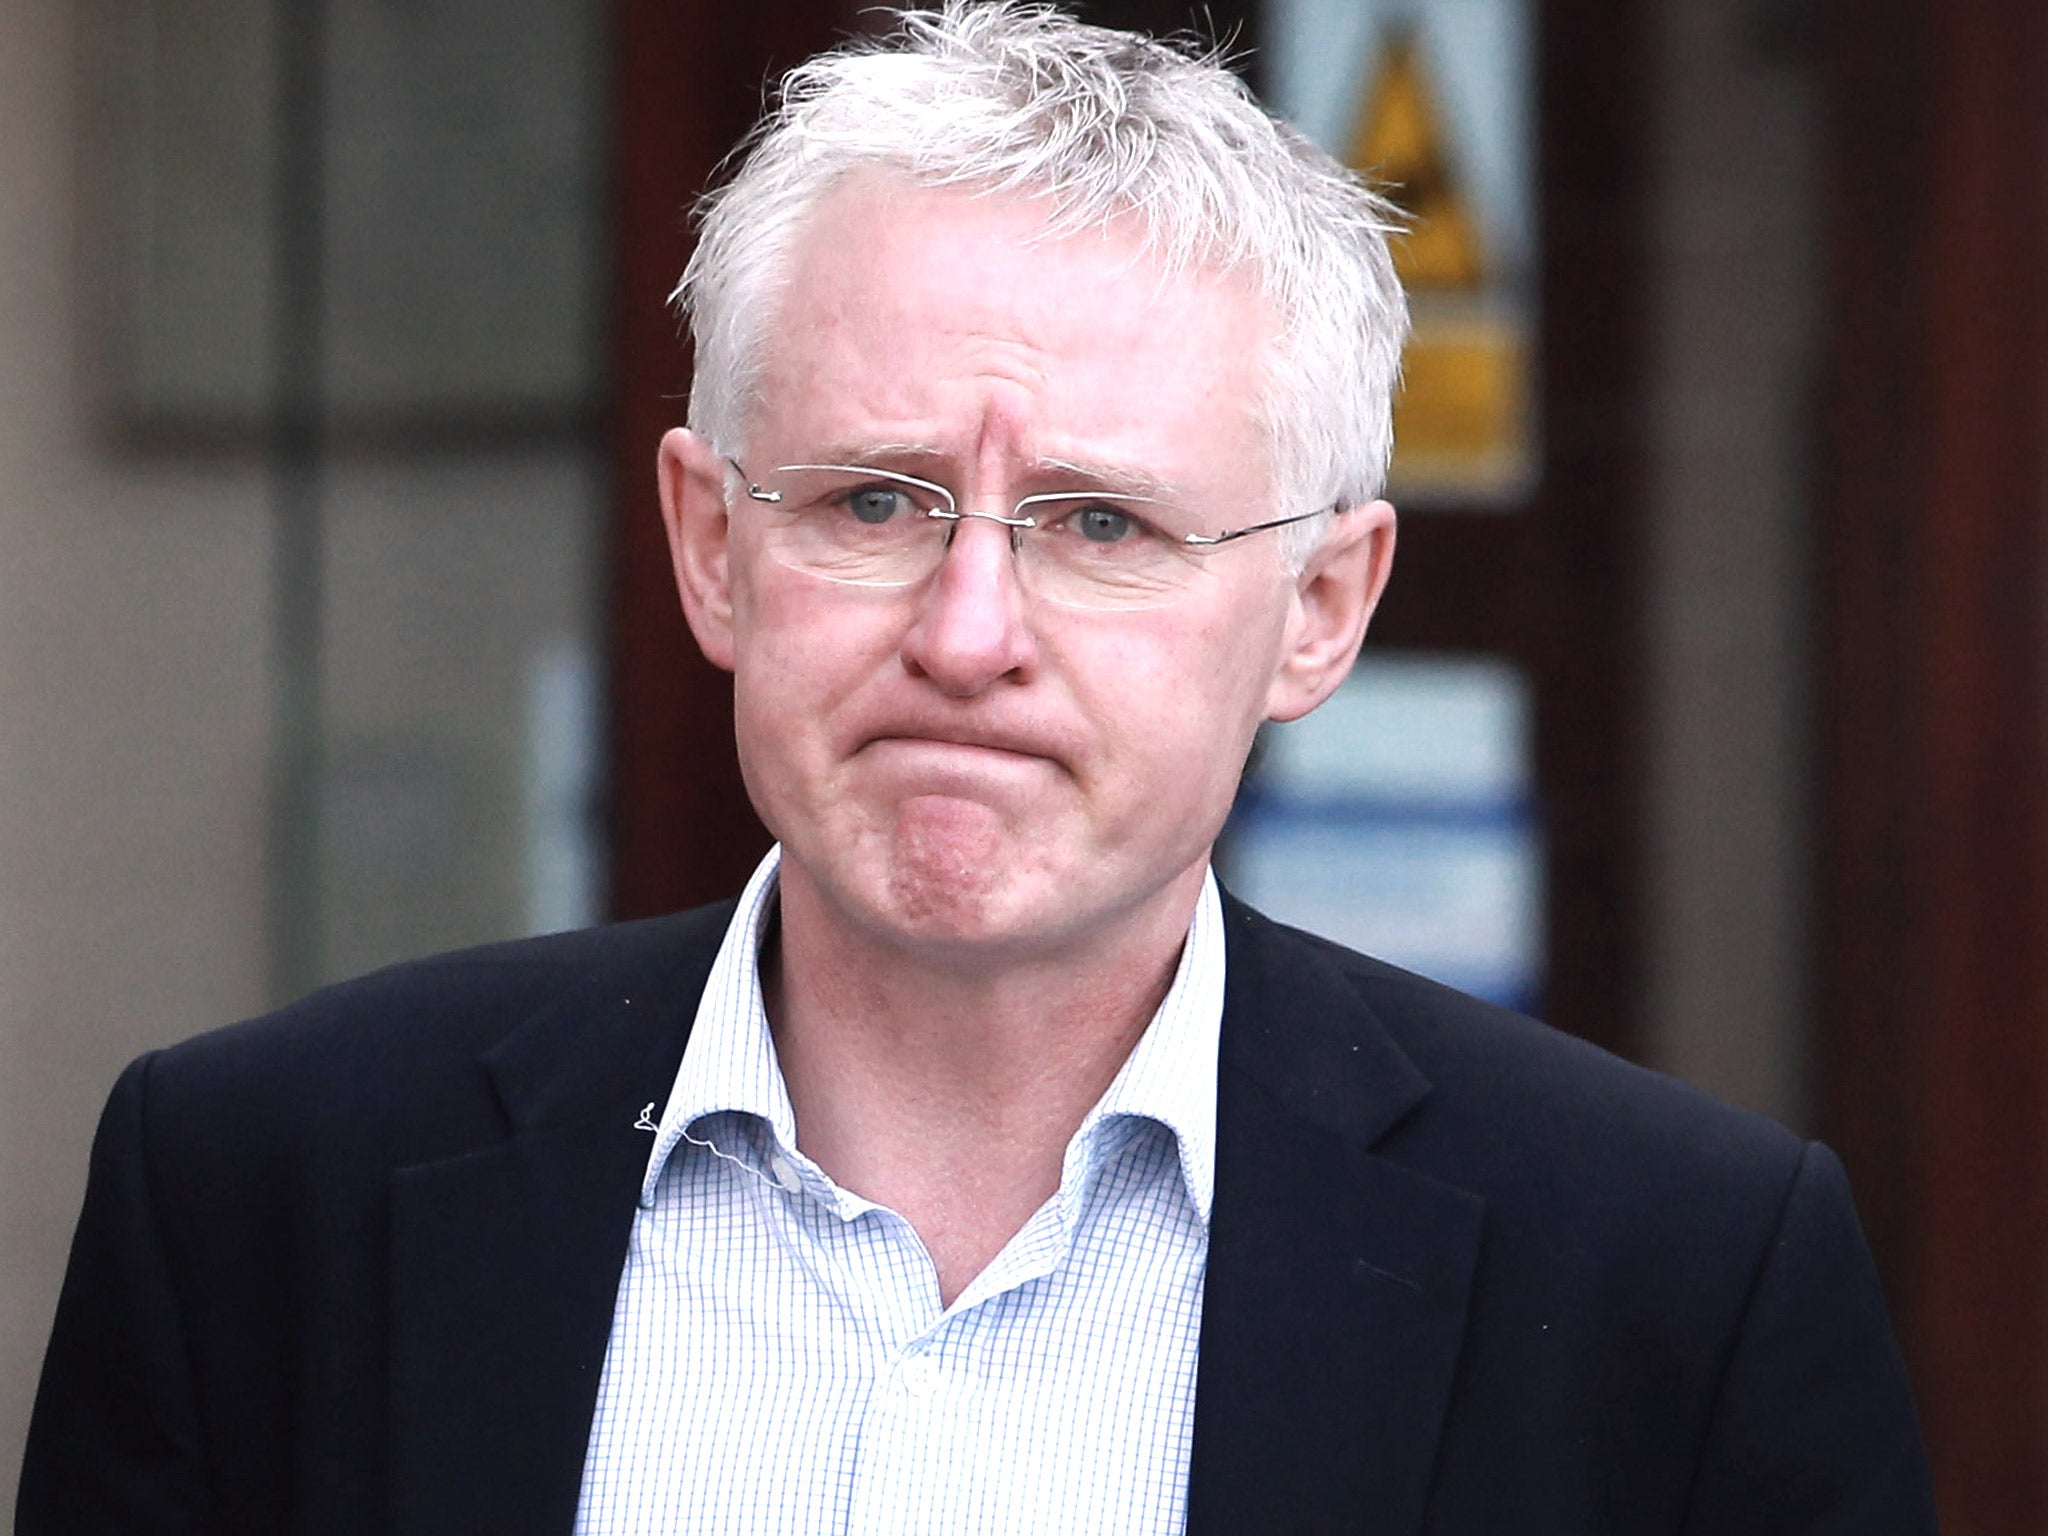 The former minister for care and support, Norman Lamb, has called the treatment of autistic people ‘cruel and inhuman’